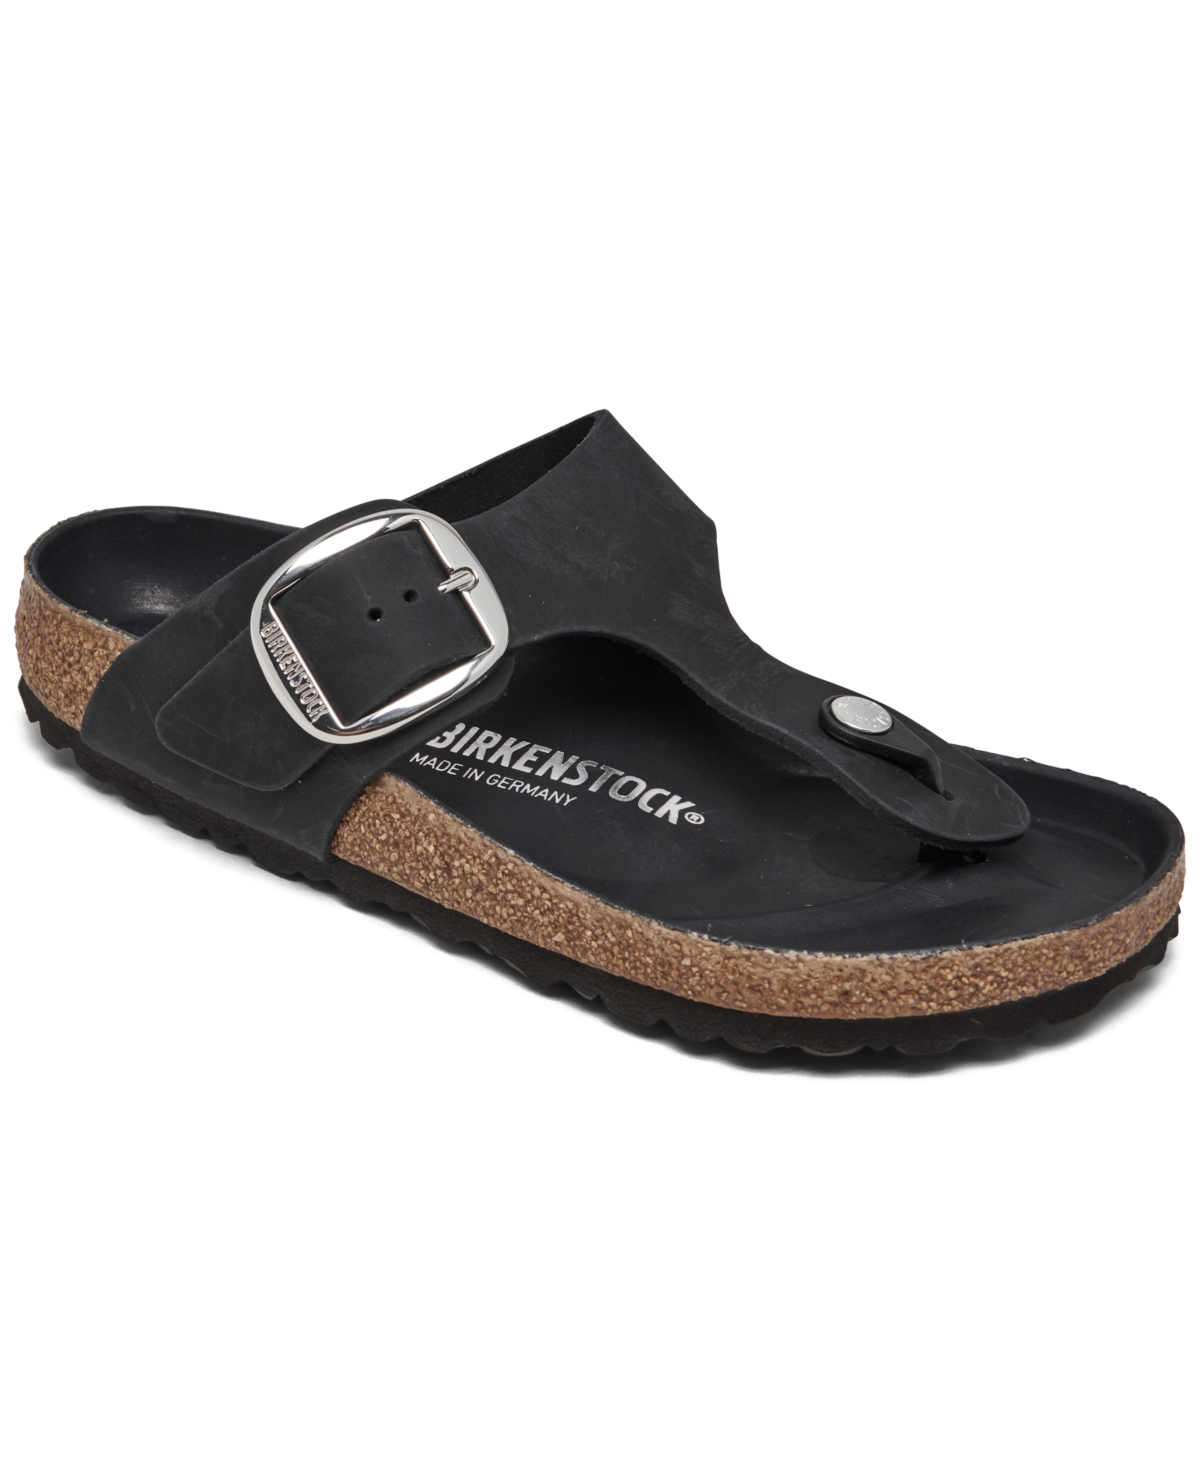 Women's Gizeh Big Buckle Oiled Leather Sandals from Finish Line - High Shine Black